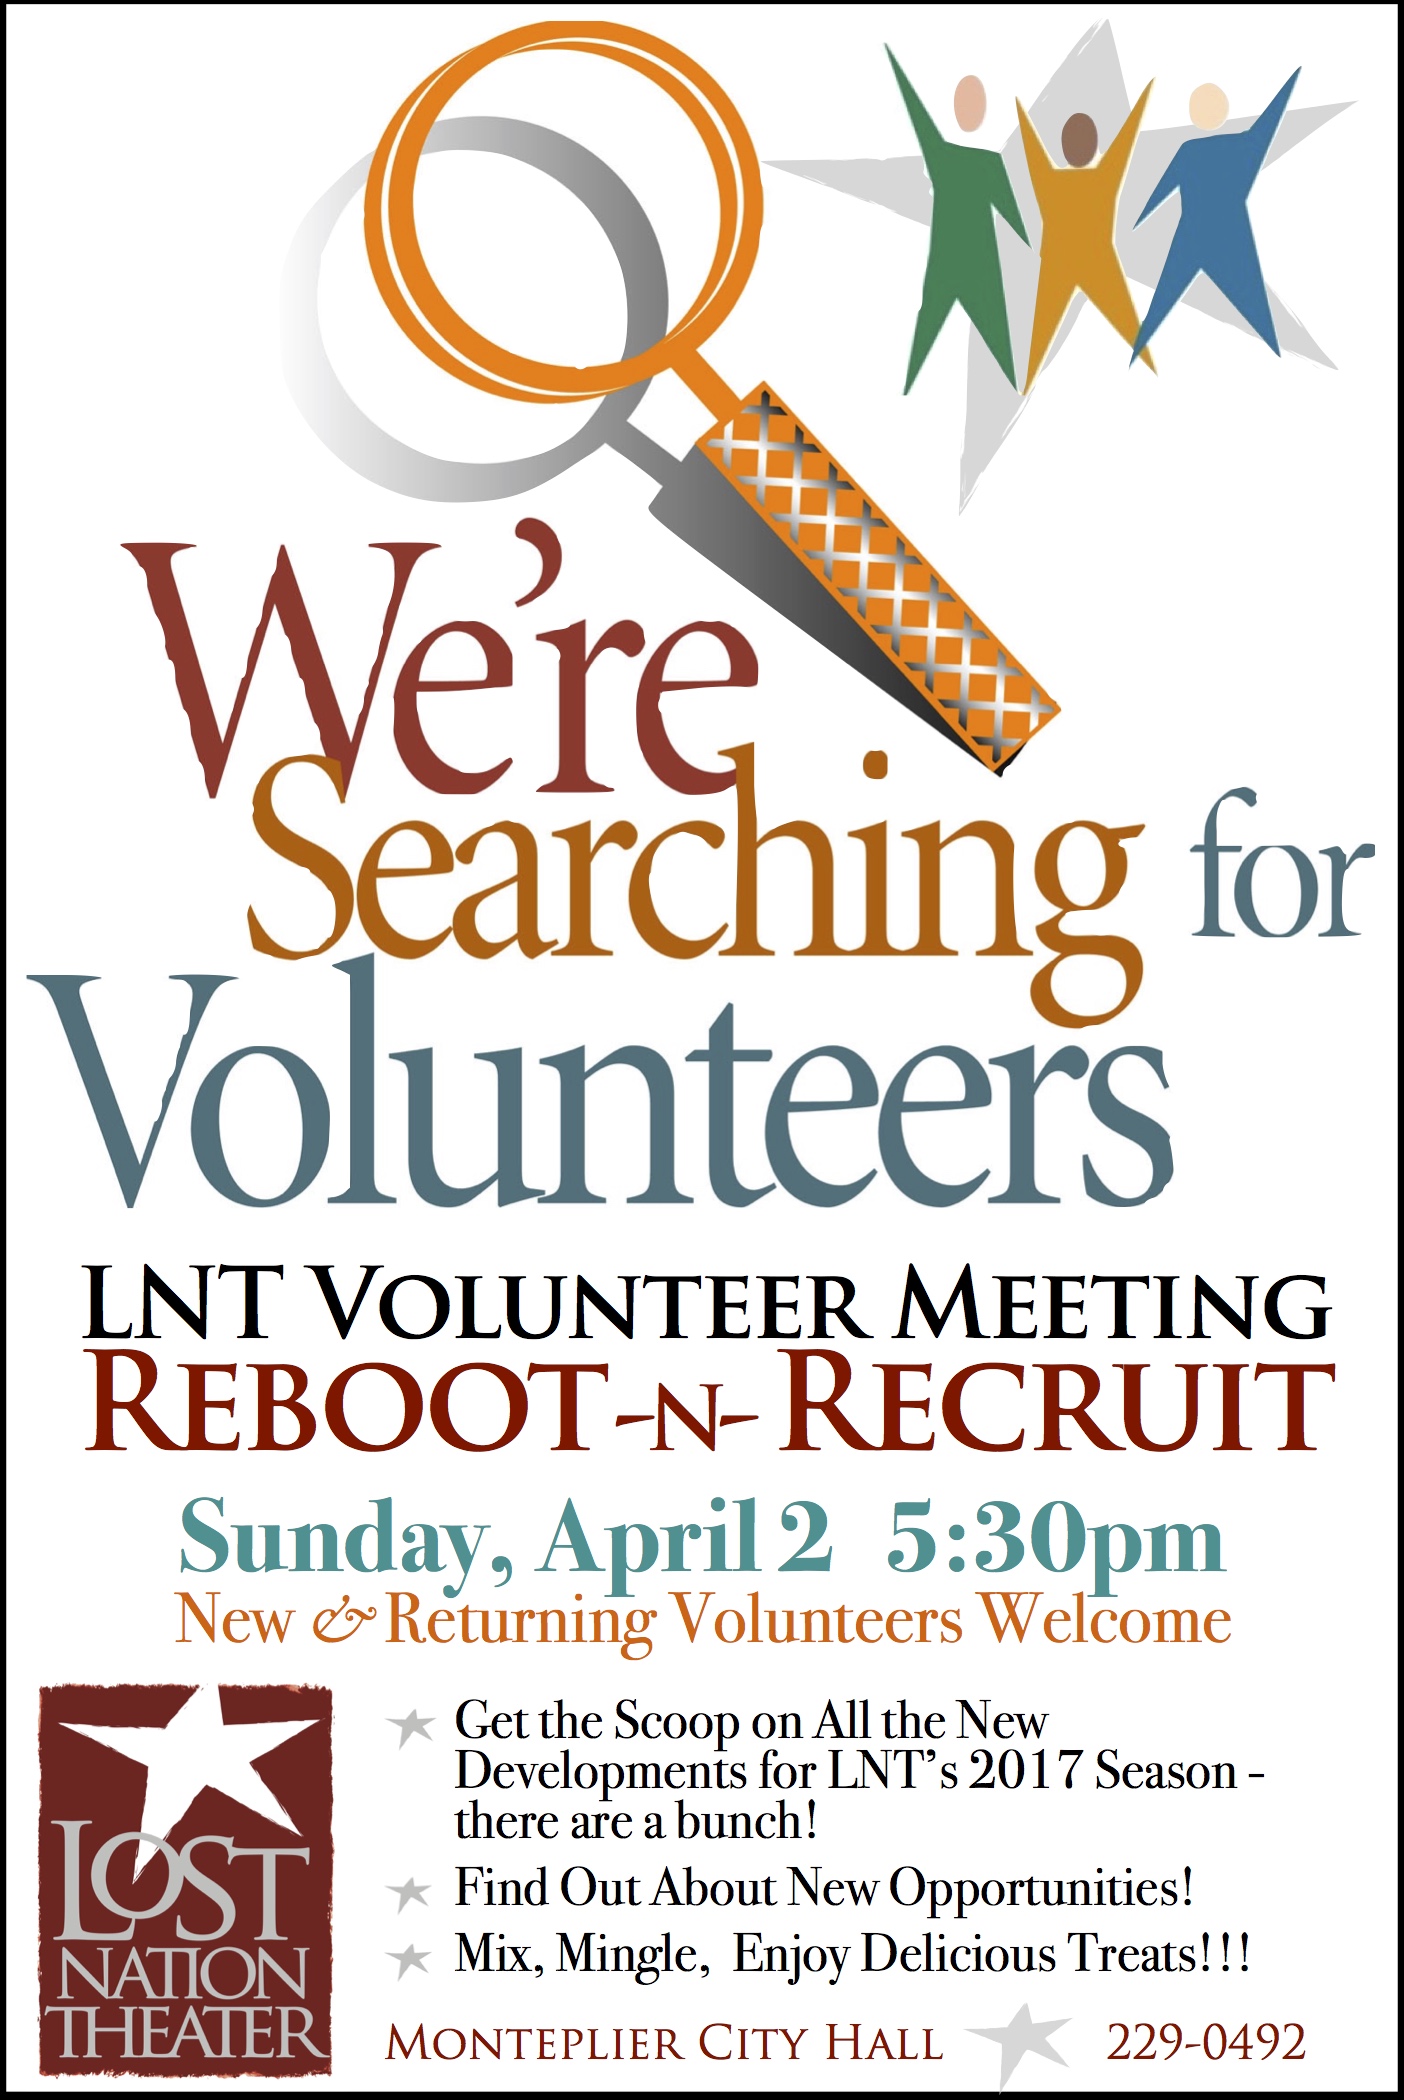 ad for LNT's volunteer meeting- we're searching for volunteers with spyglass